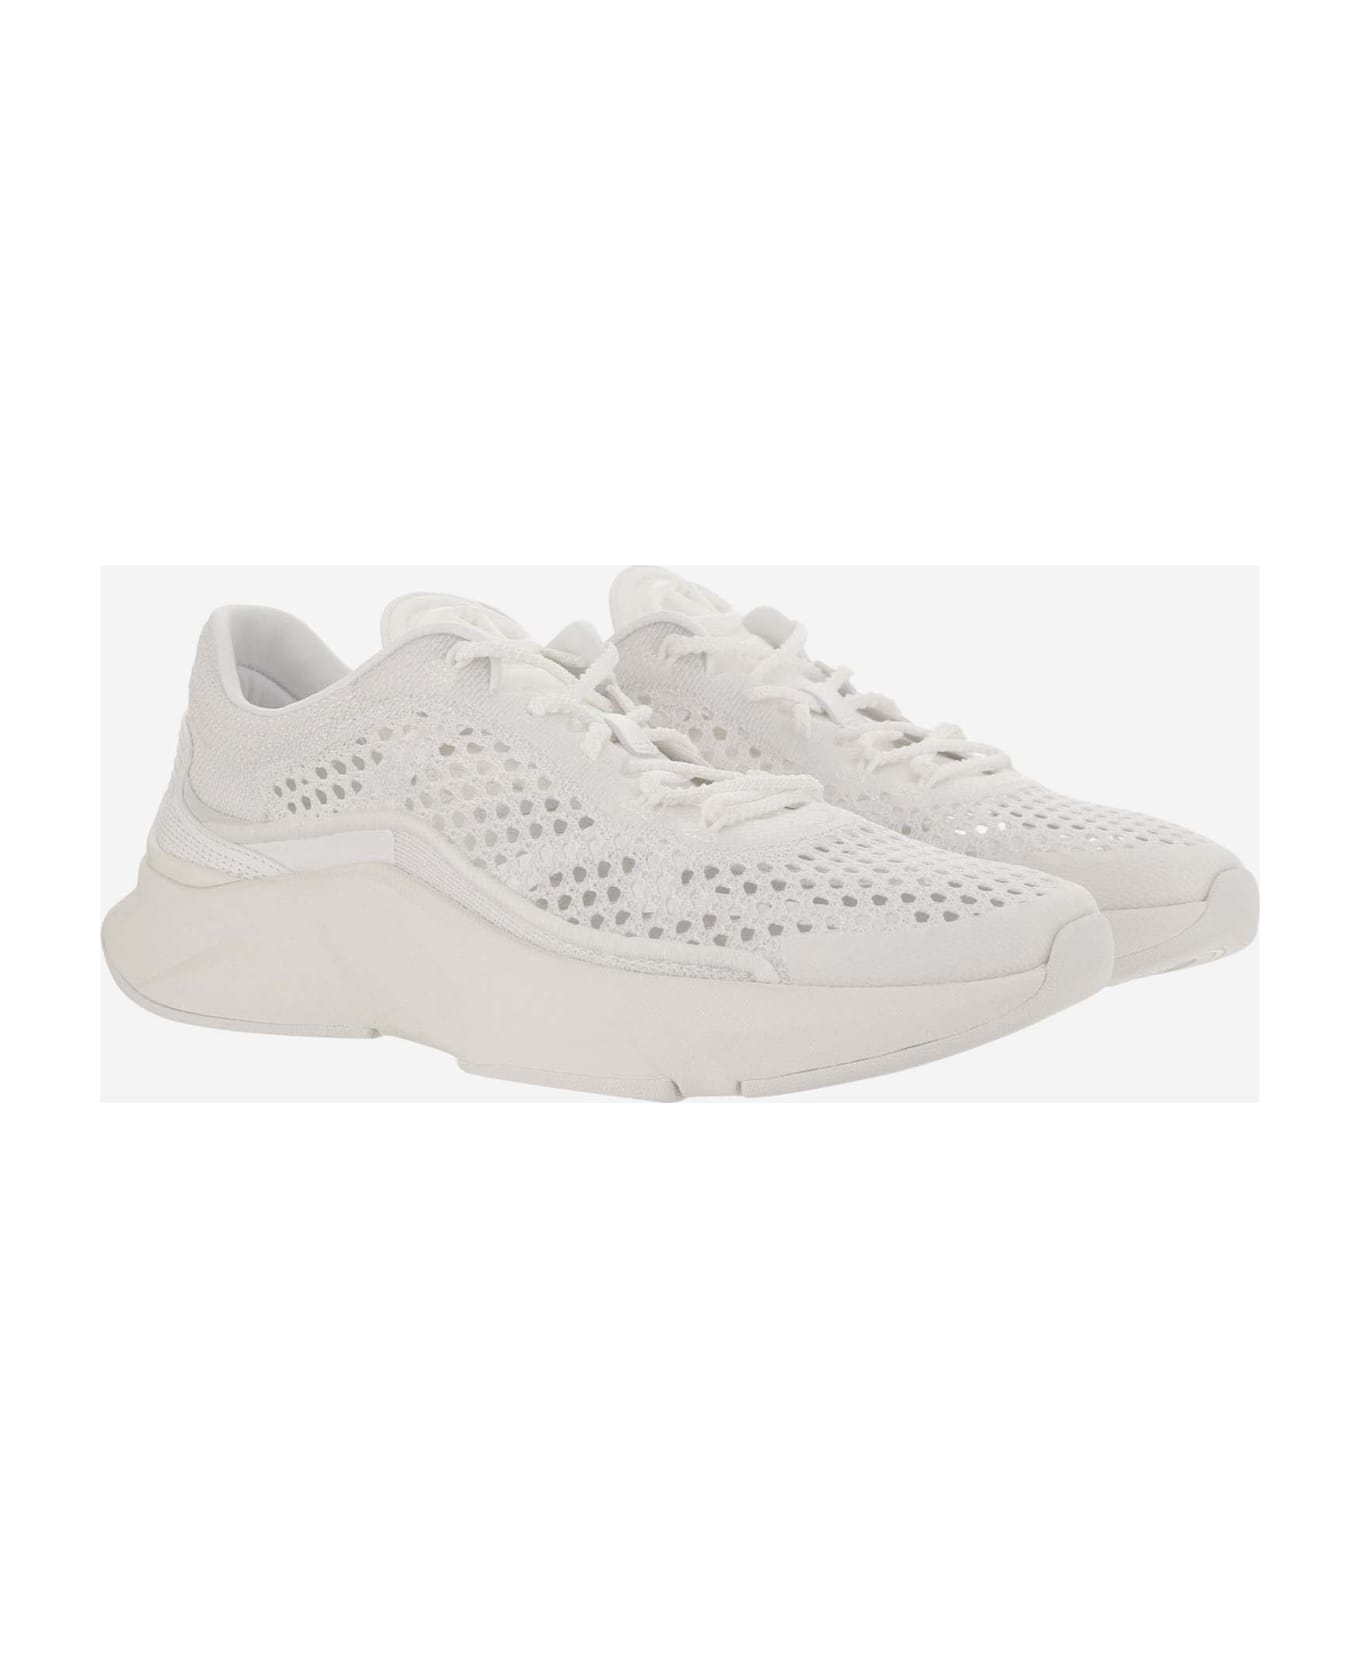 Valentino Garavani True Actress Sneakers In Mesh And Leather - White